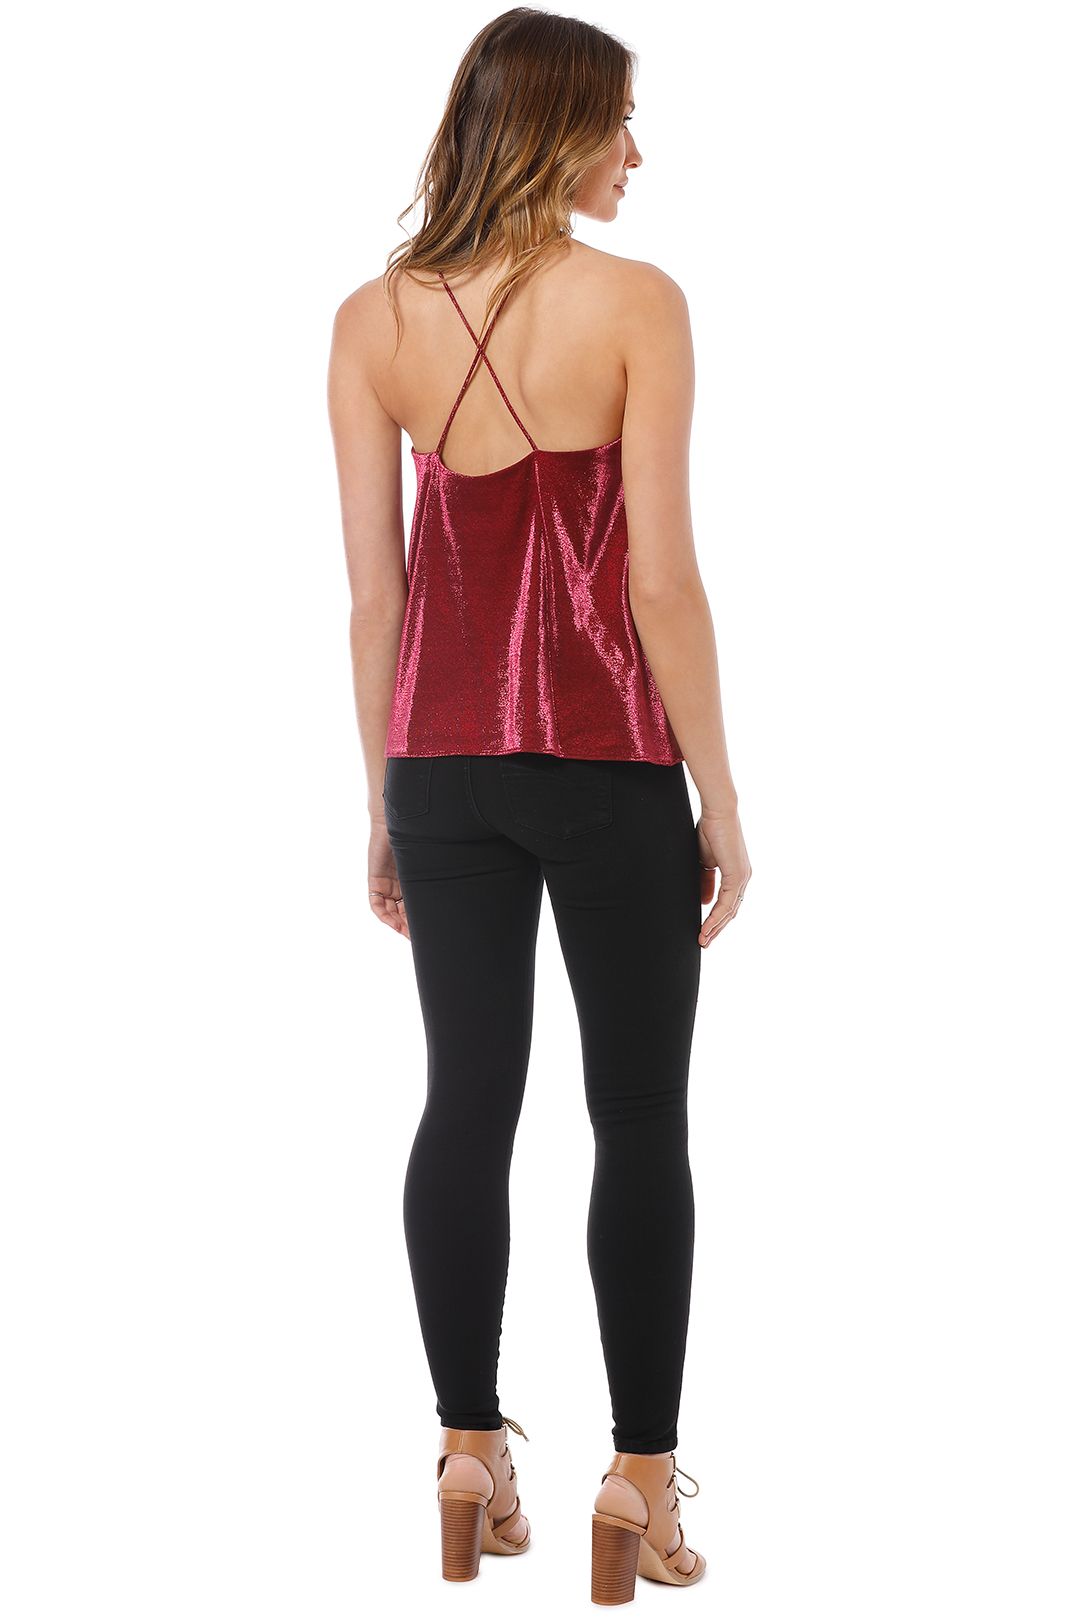 Camilla and Marc - Opasidy Top - Red - Back